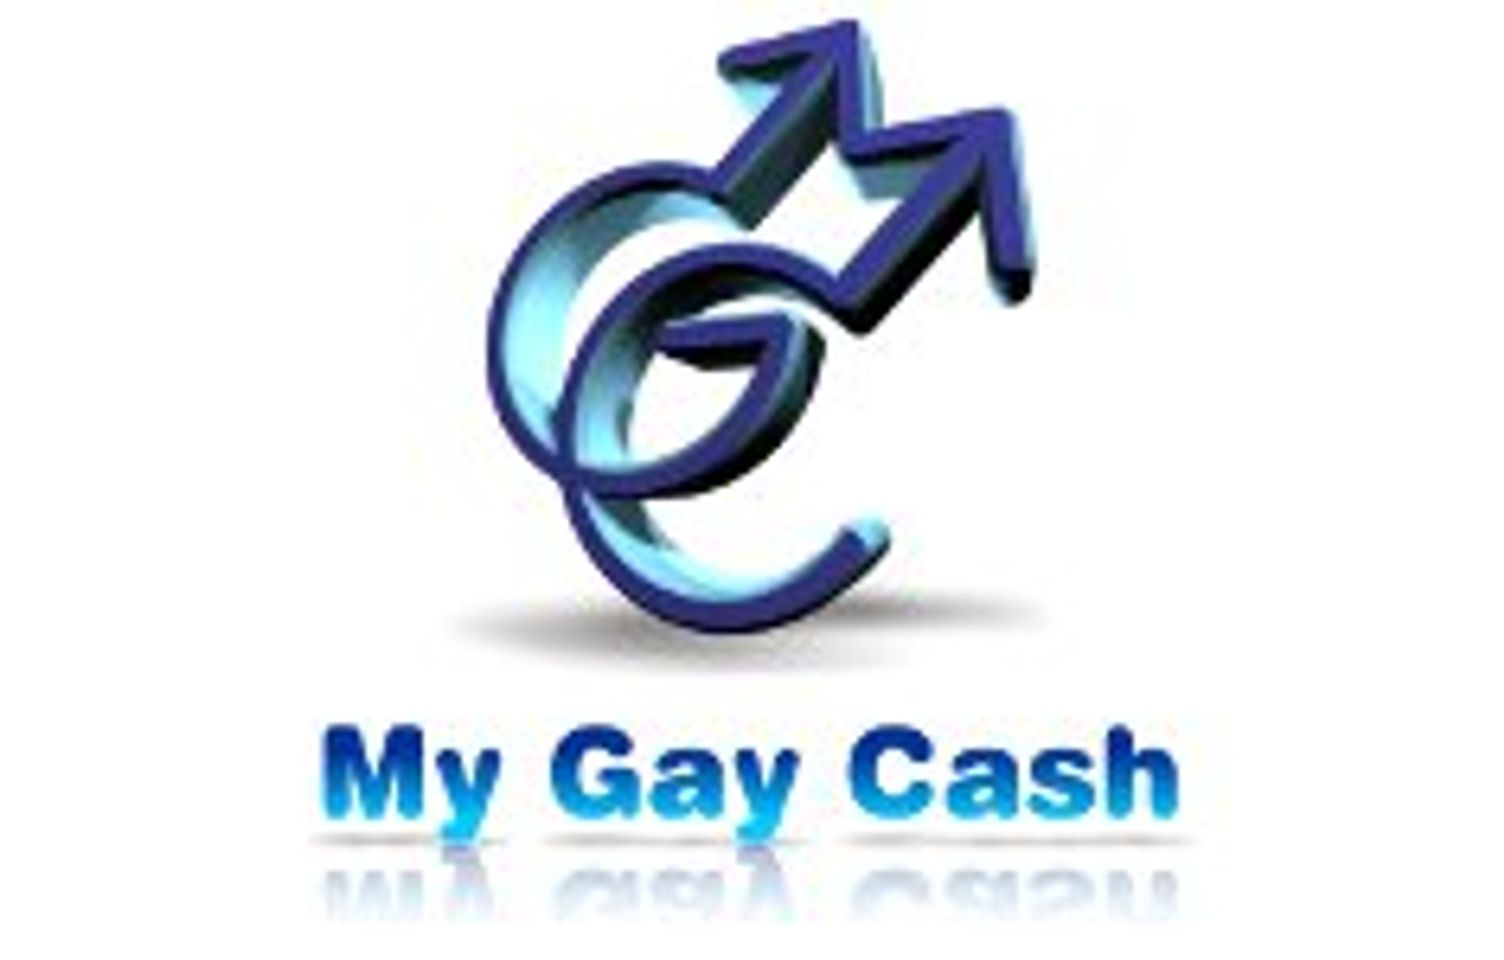 MyGayCash.com Launches New All-Access Pass